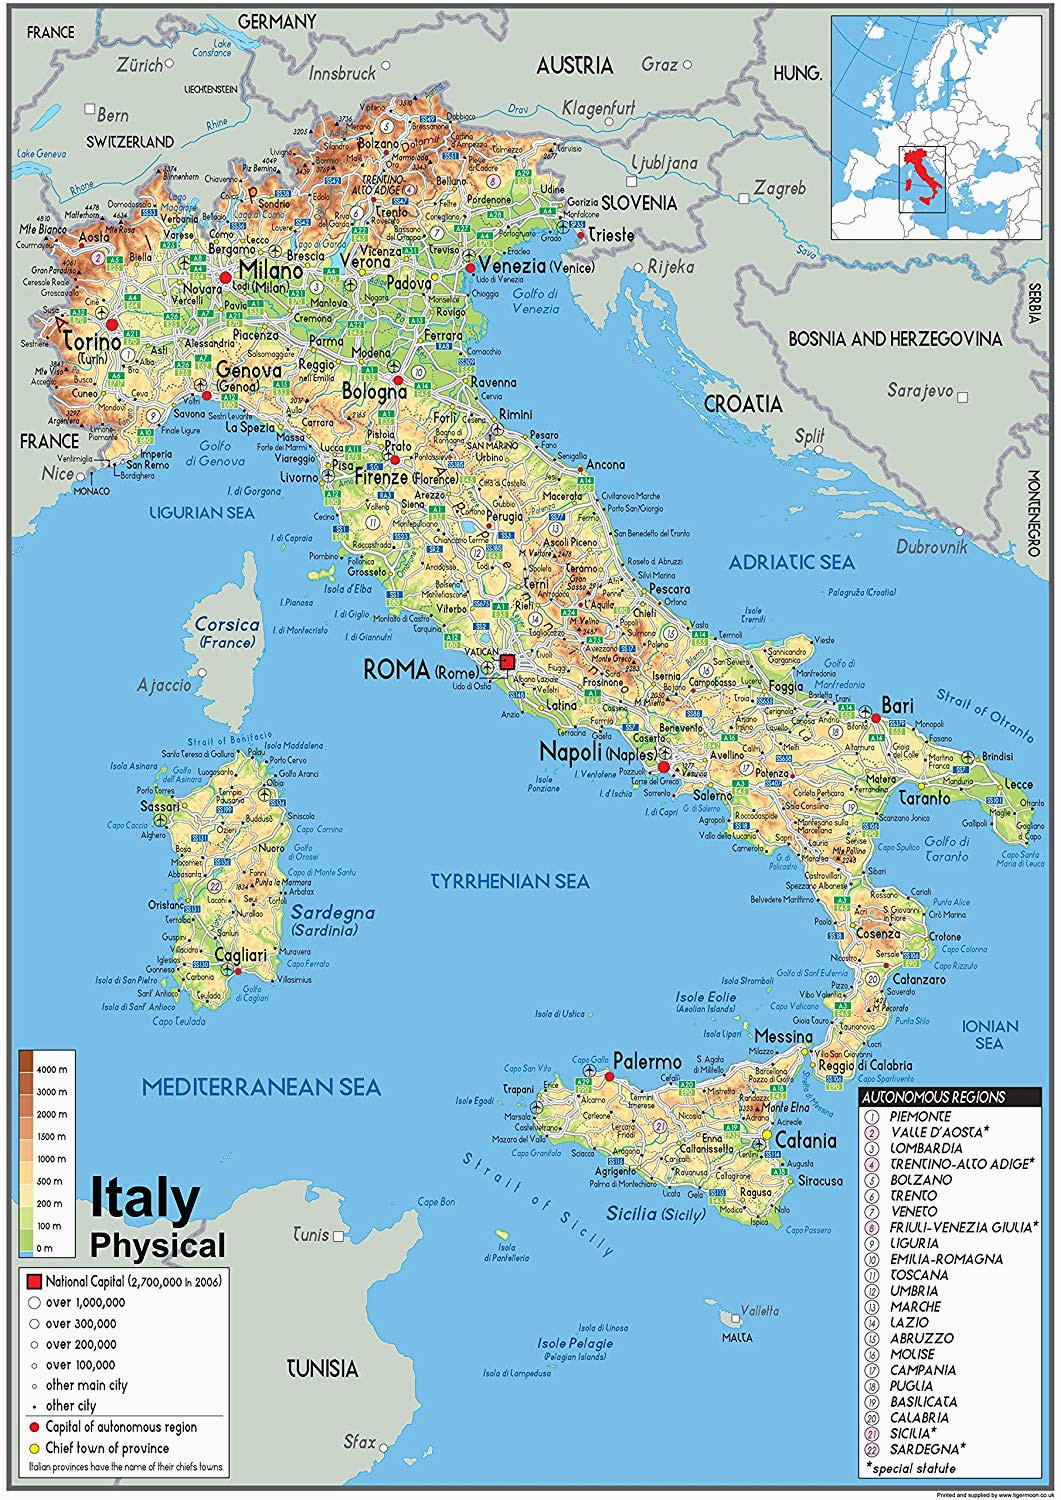 Italy Physical Features Map Italy Physical Map Paper Laminated A2 Size 42 X 59 4 Cm Amazon